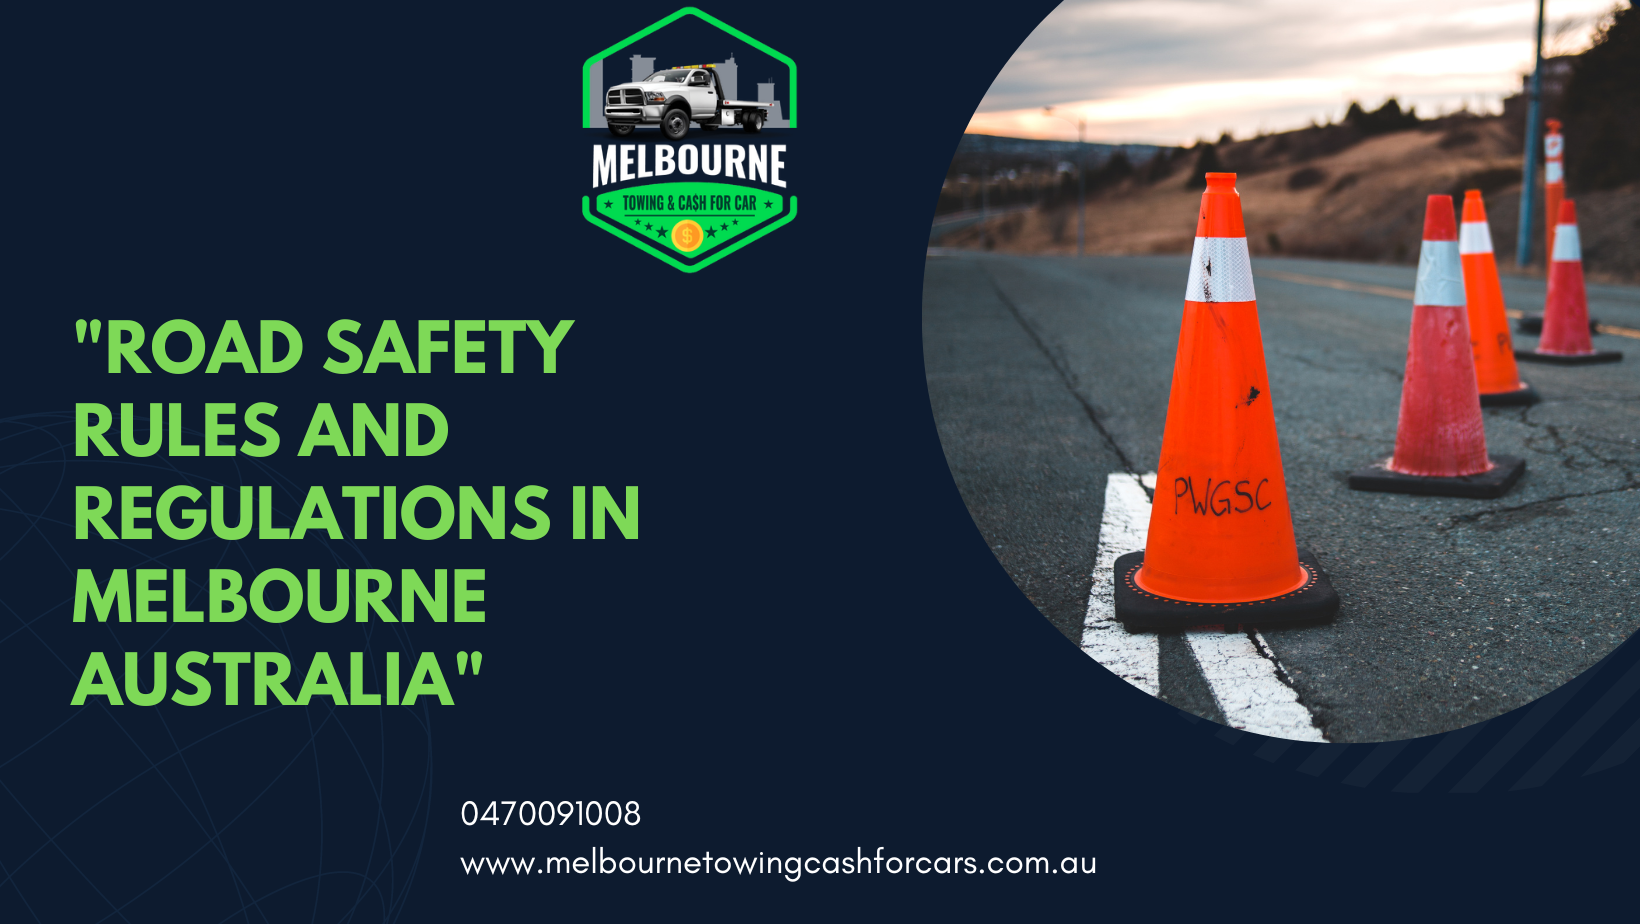 Road safety rules and regulations in Melbourne Australia